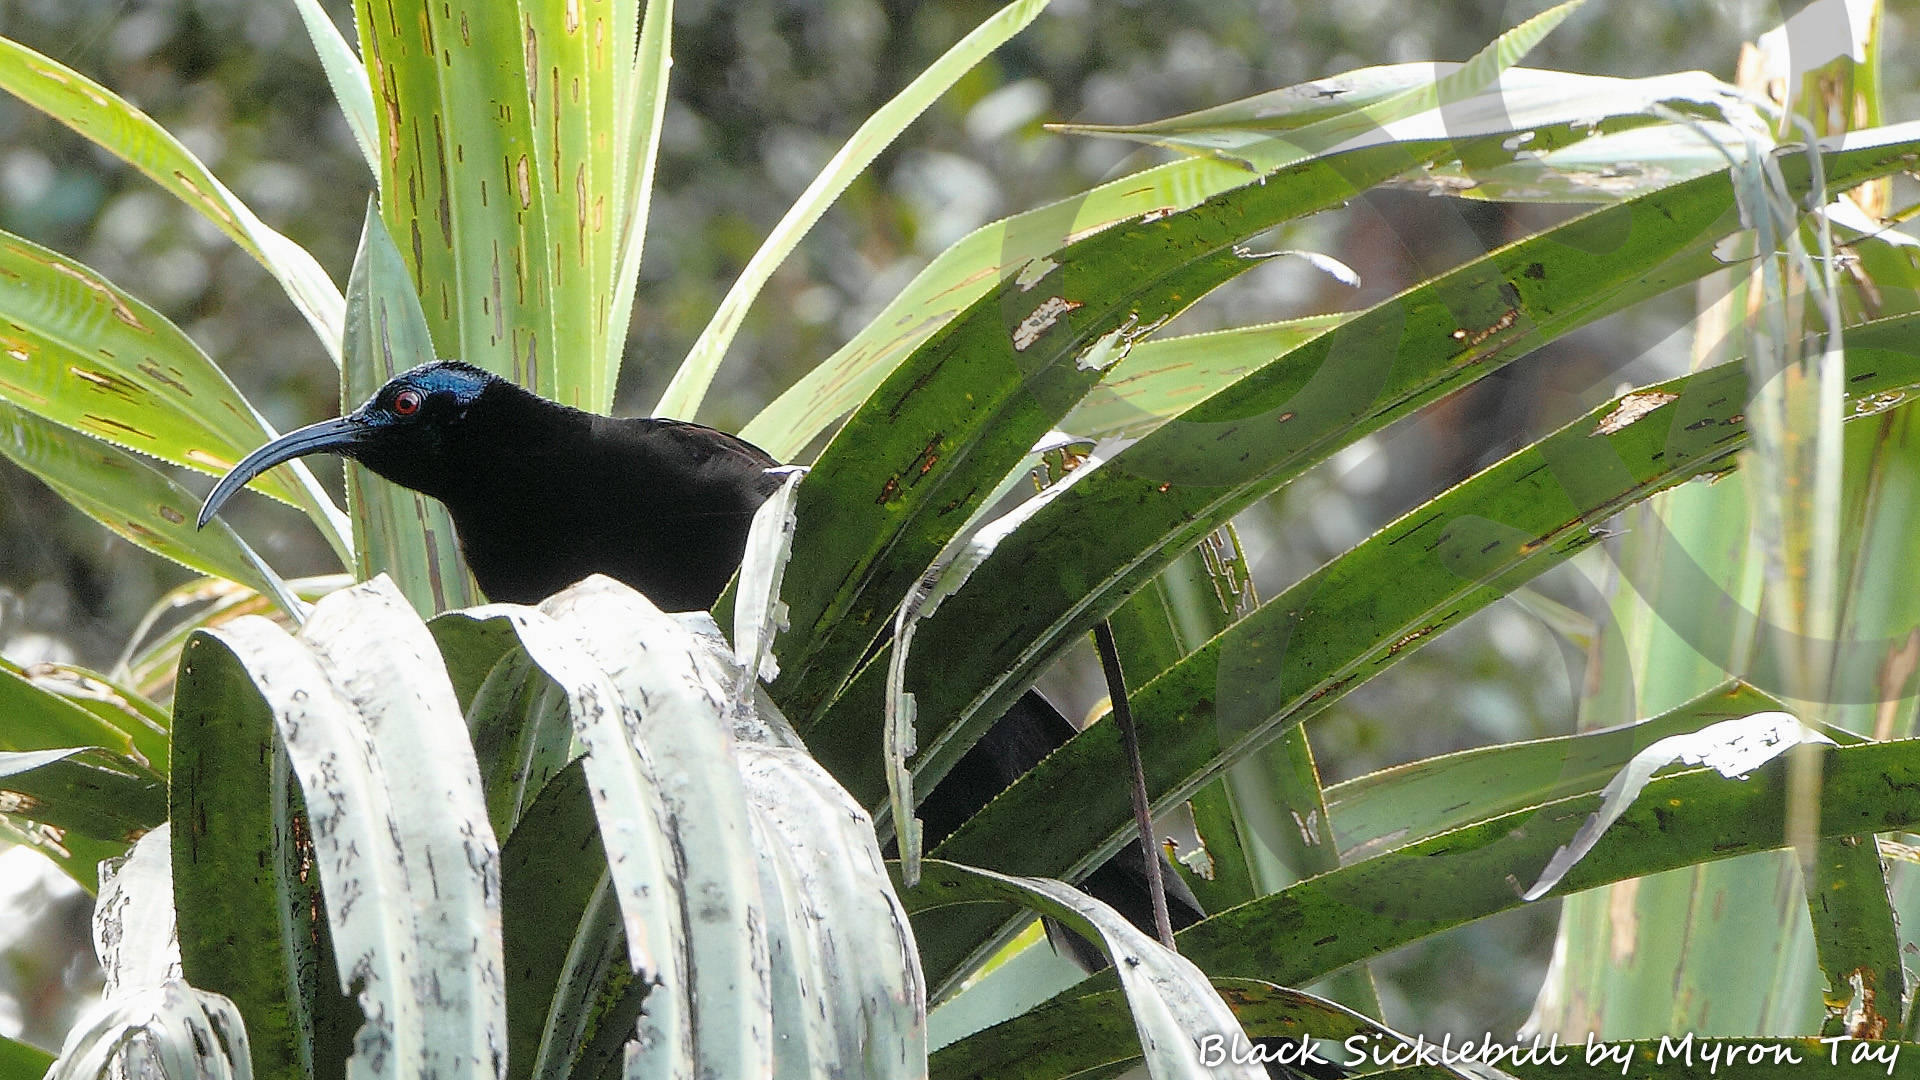 An adult male Black Sicklebill Epimachus fastuosus feasts on the fruit of a Pandanus-palm high-up in the cloud-forest of the Arfak Mountains. Copyright © Myron Tay